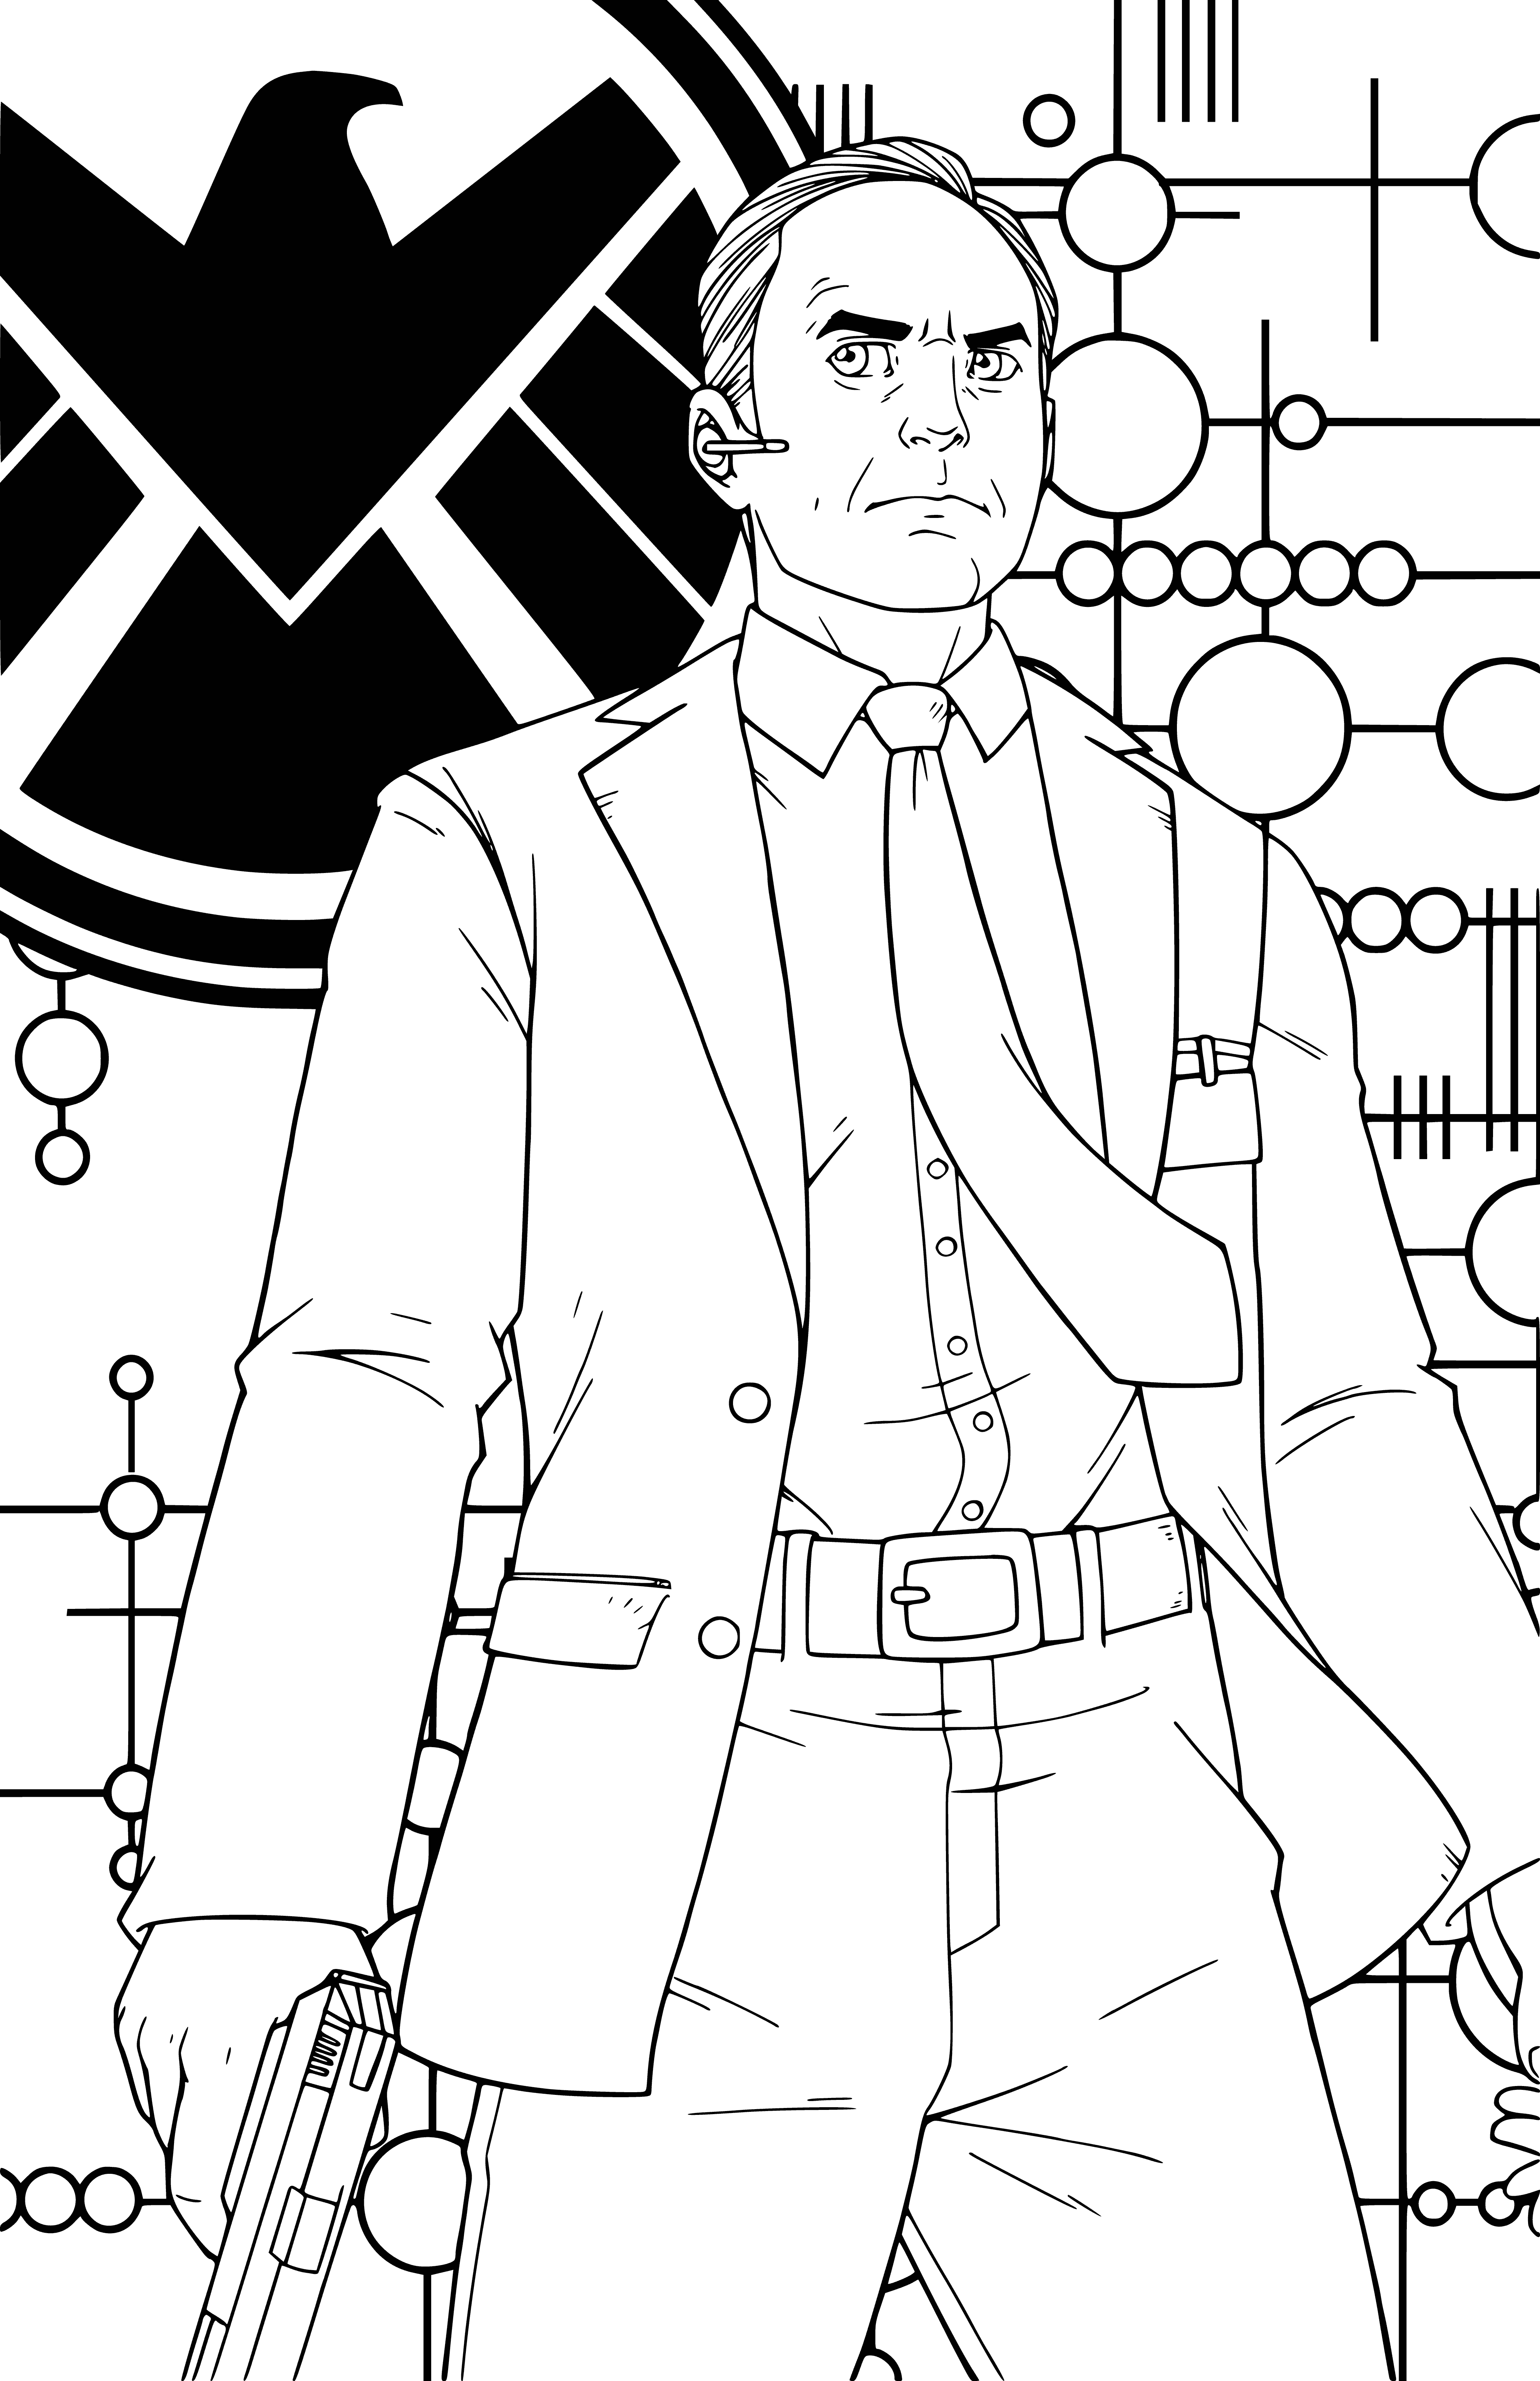 coloring page: Middle-aged white man in black suit & tie, balding, serious expression, looking to side.